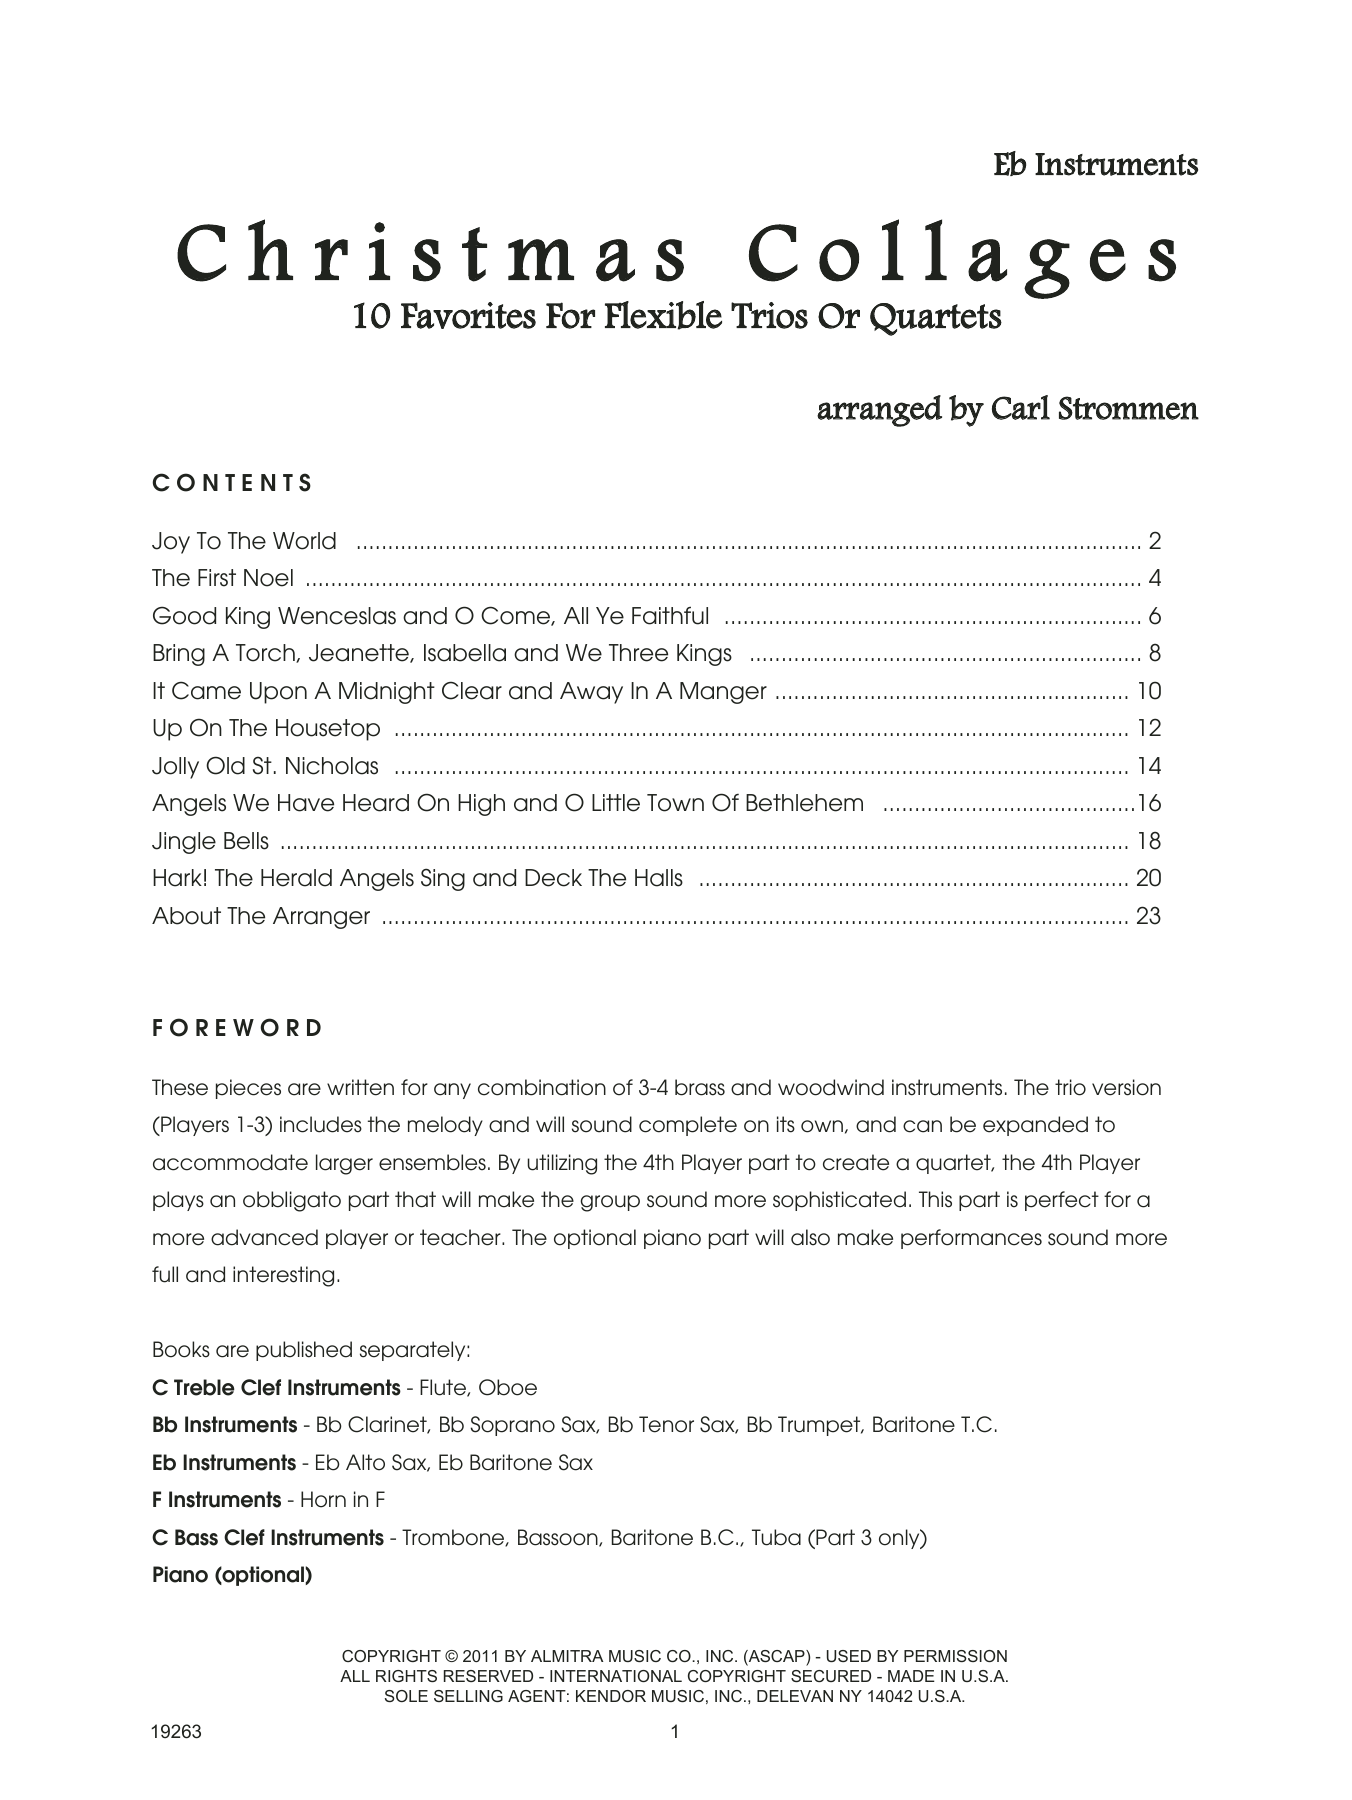 Download Strommen Christmas Collages - Eb Instruments Sheet Music